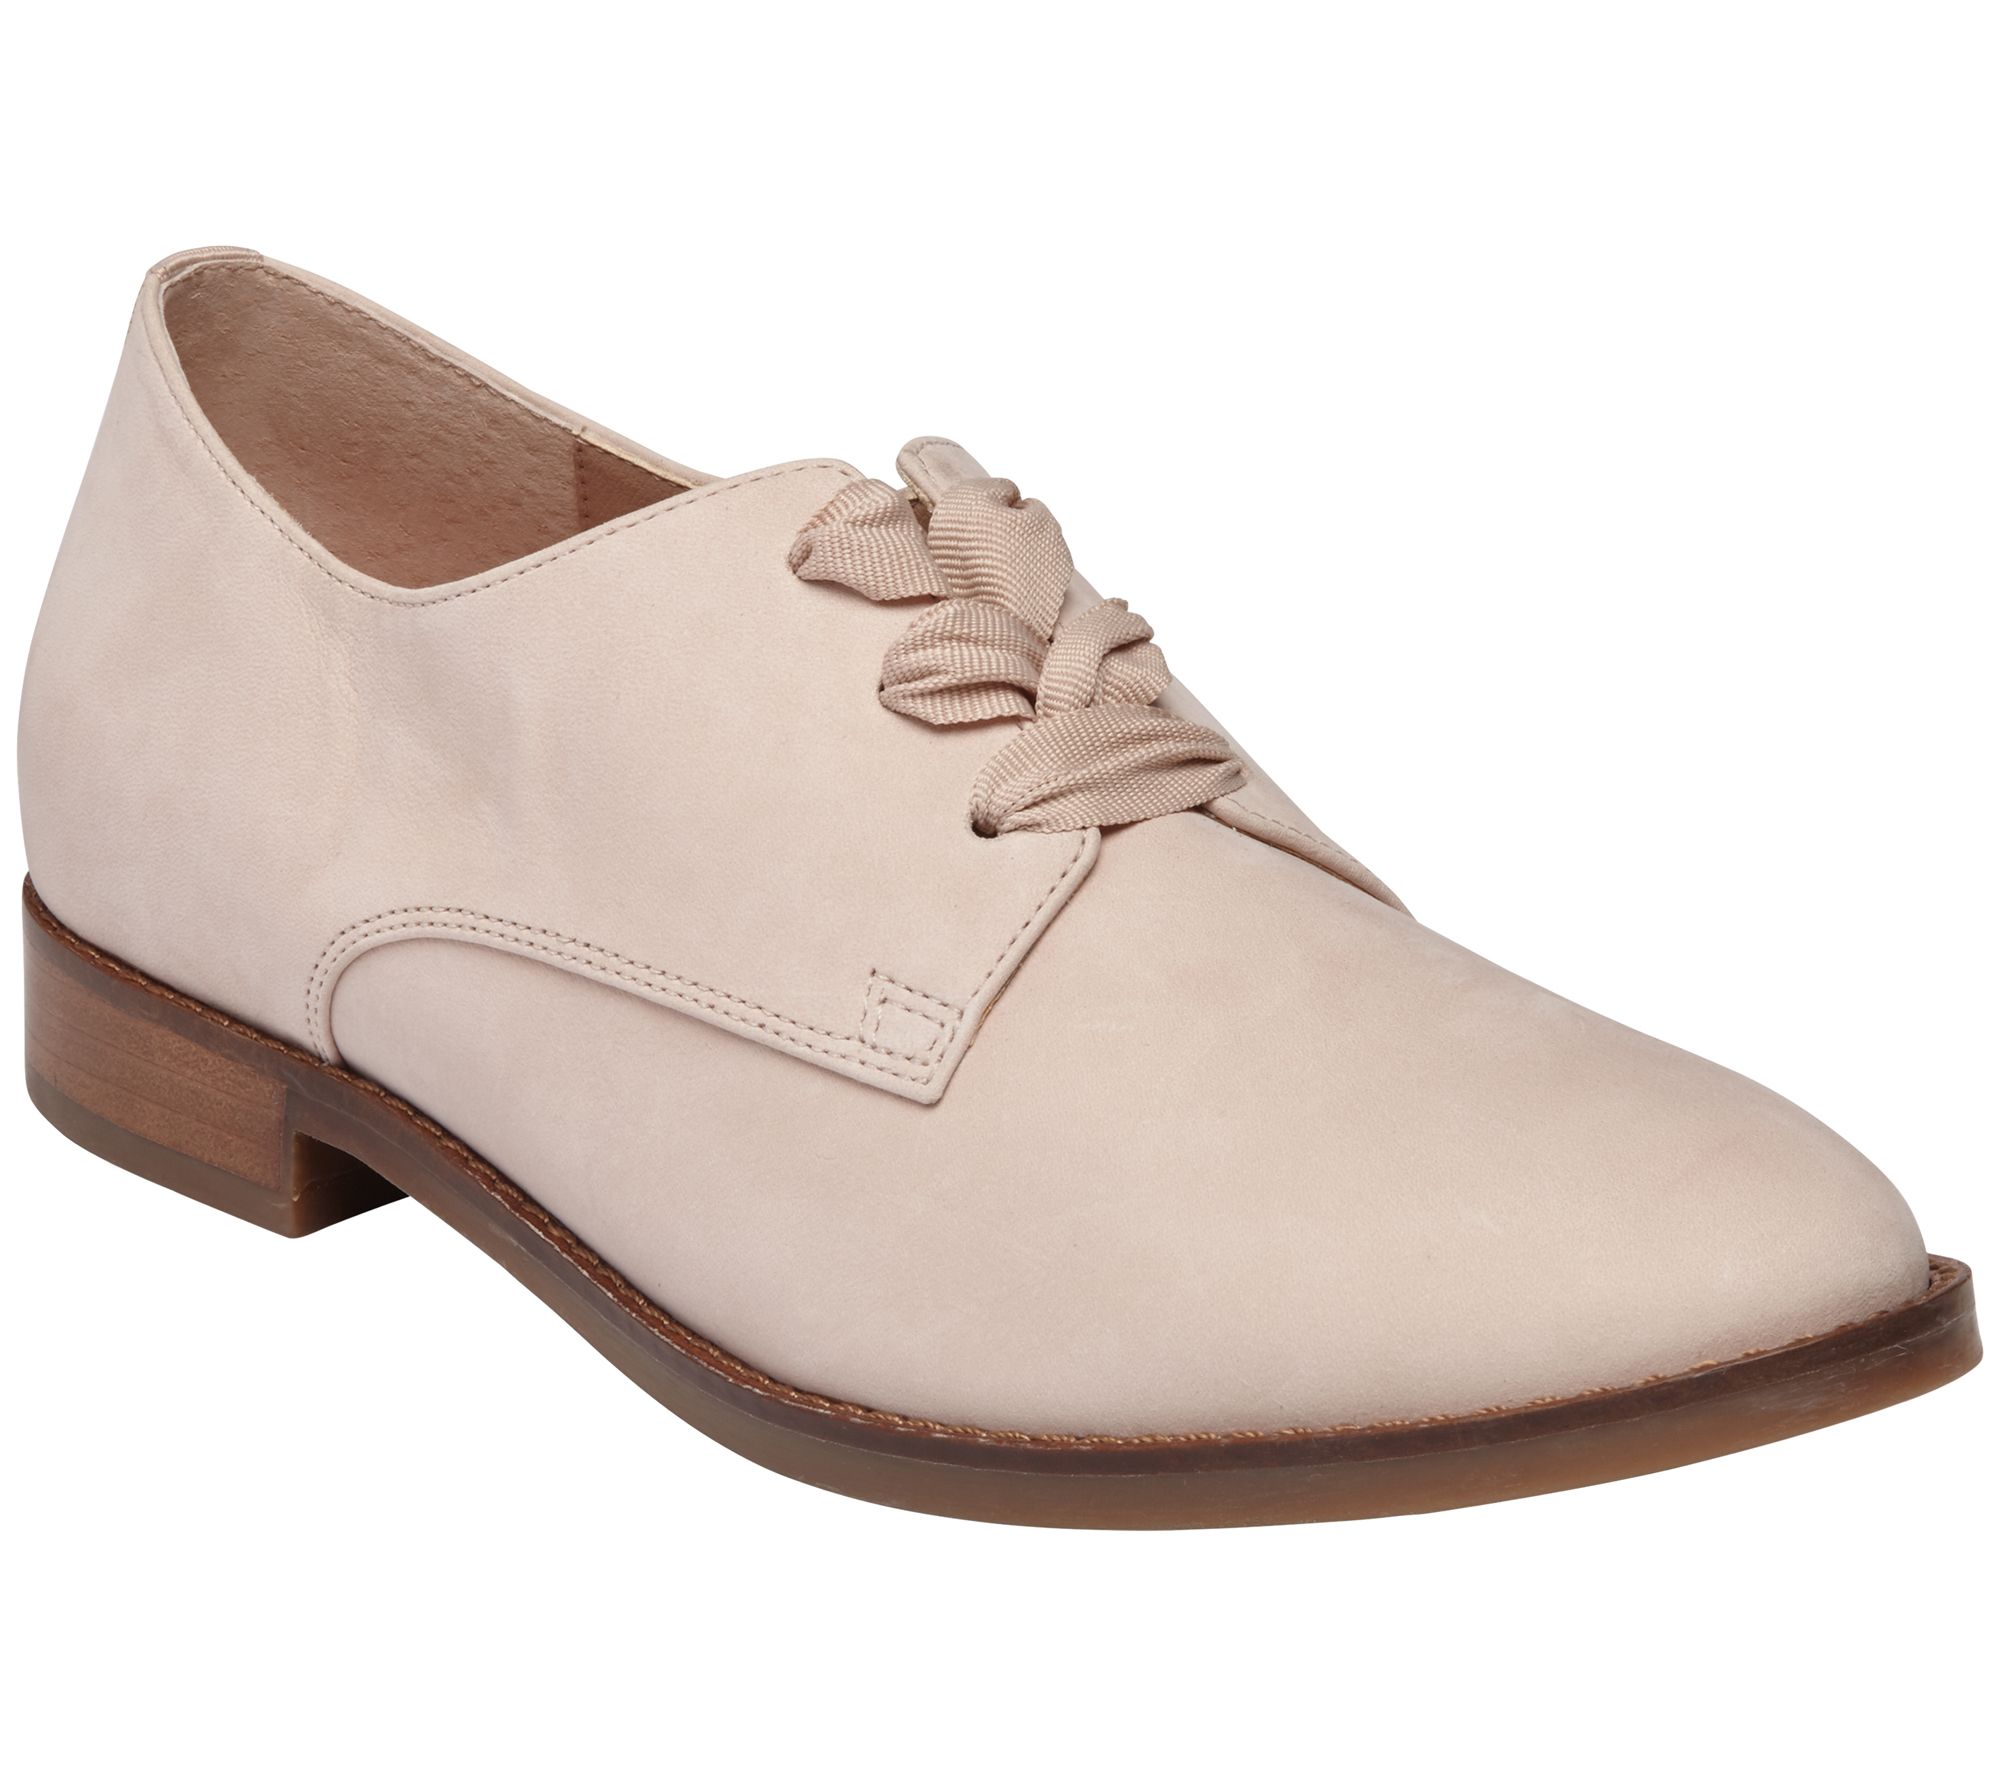 Vionic Lace-Up Leather Derby Shoes - Evelyn - QVC.com